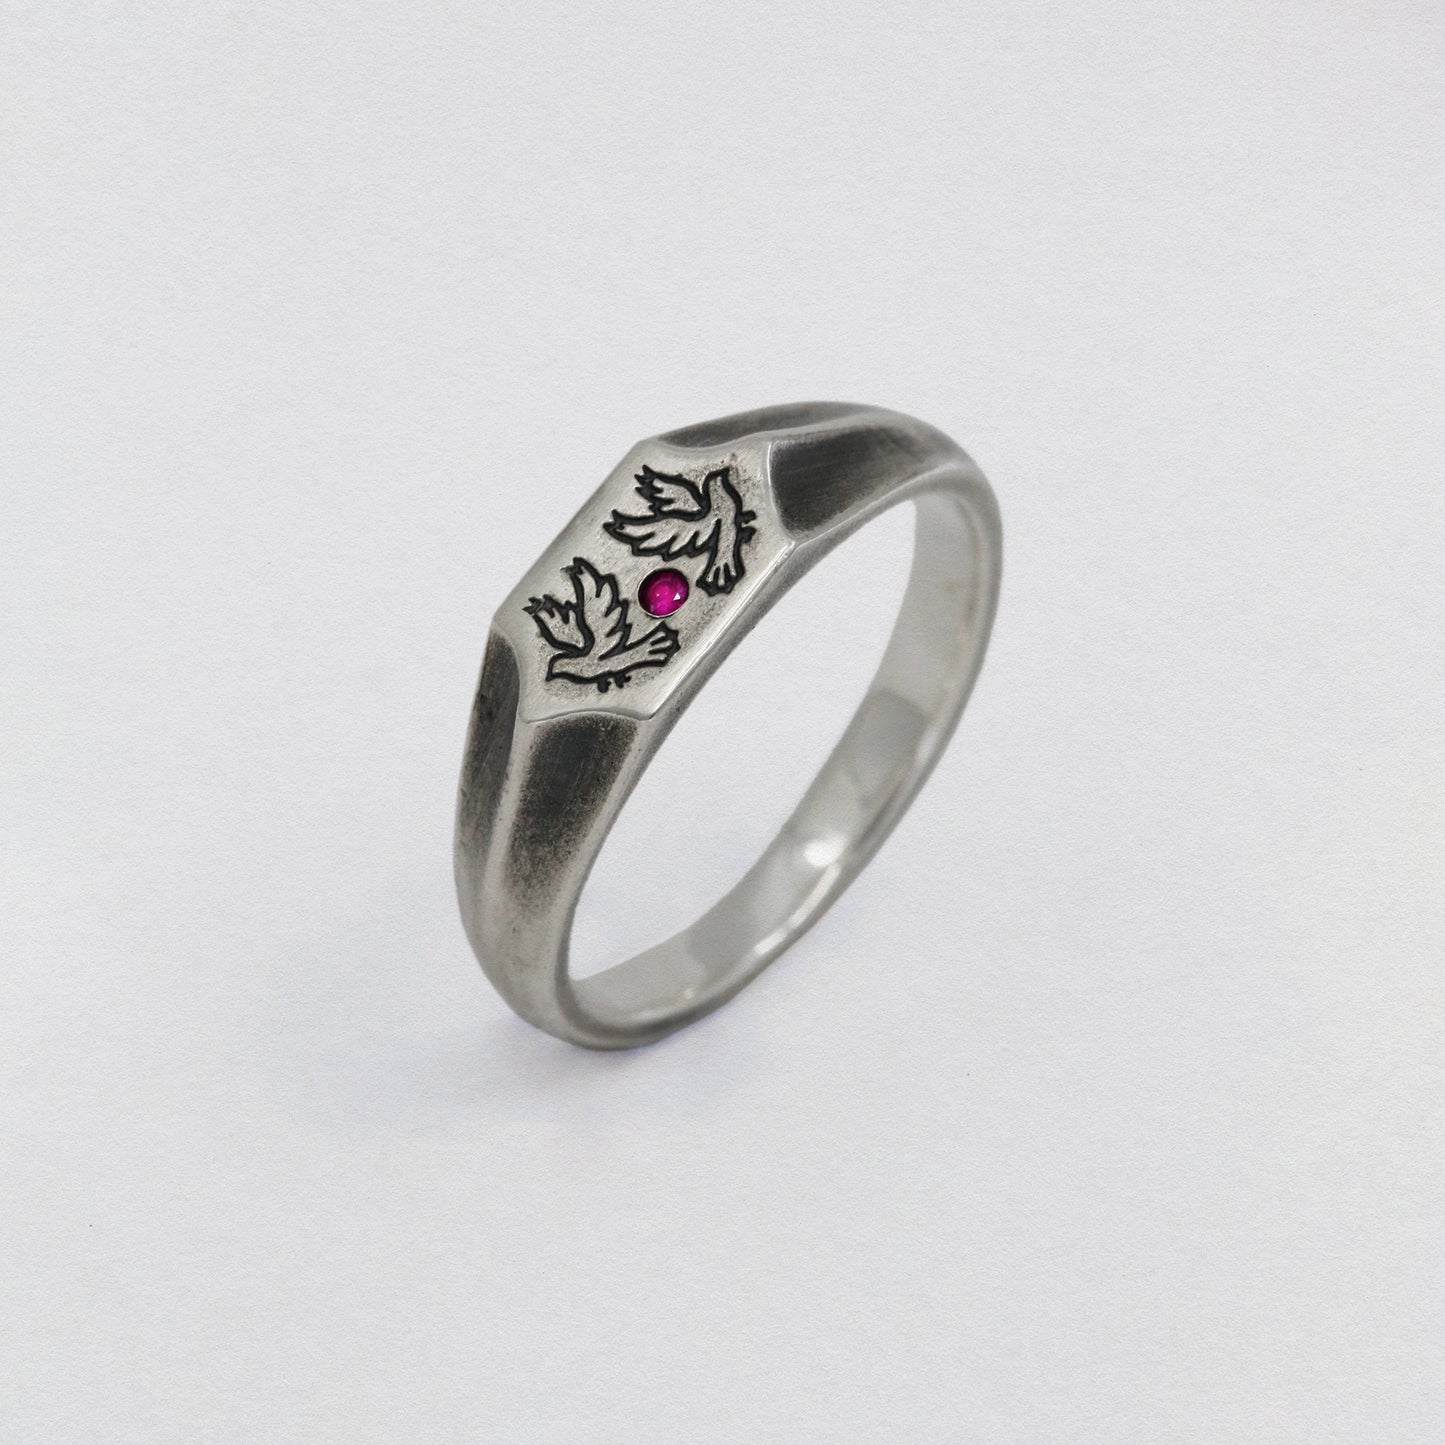 Two birds and a ruby stone on a 925 silver signet ring